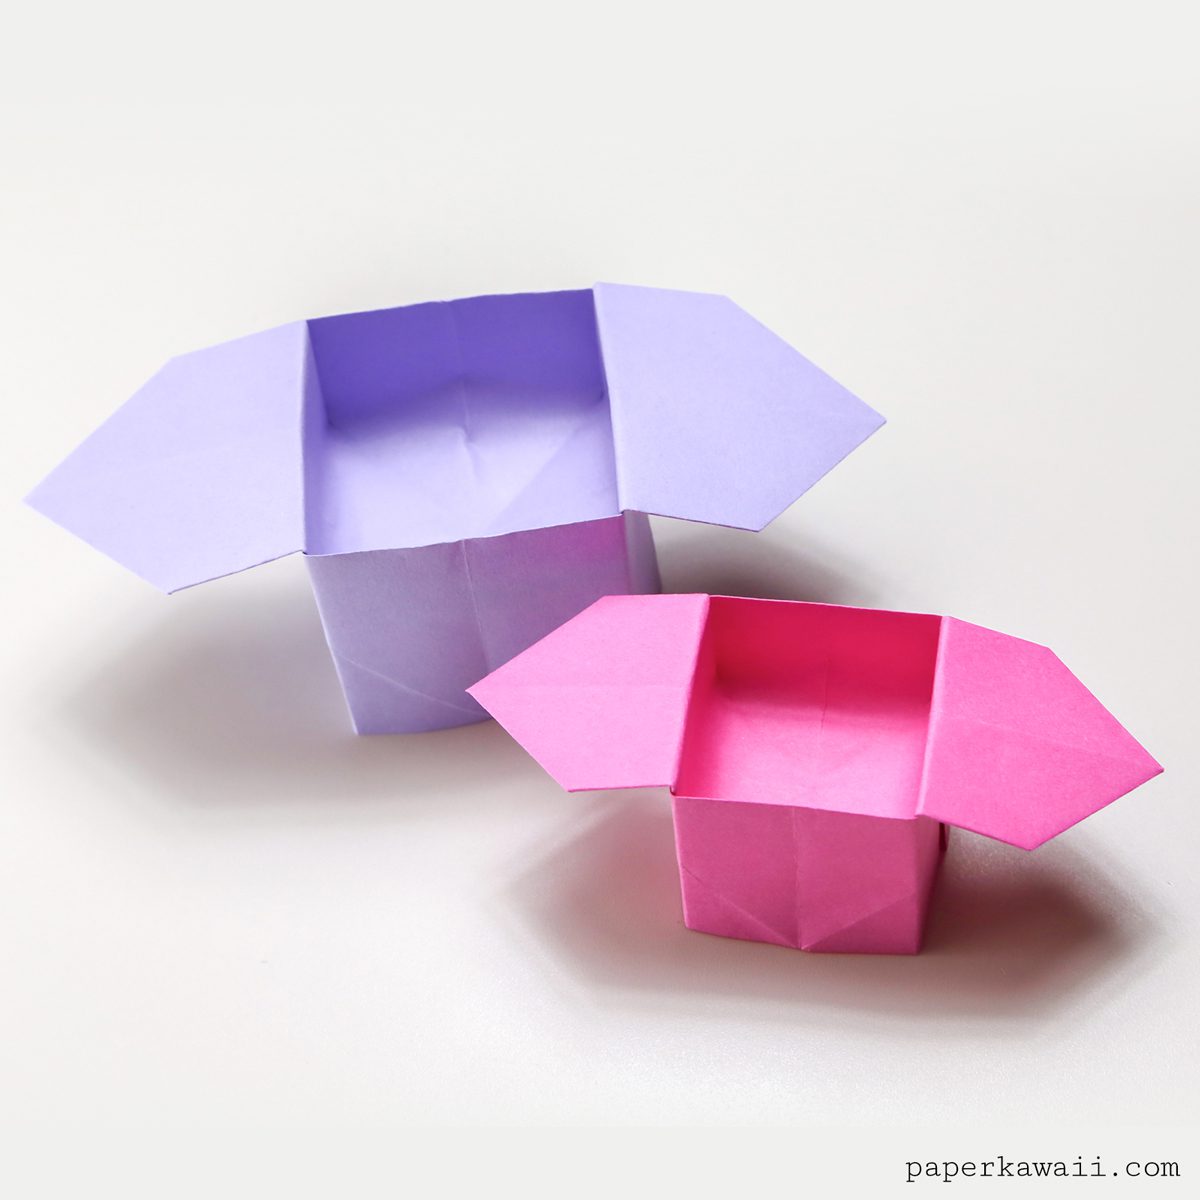 3-easy-origami-boxes-sanbo-instructions